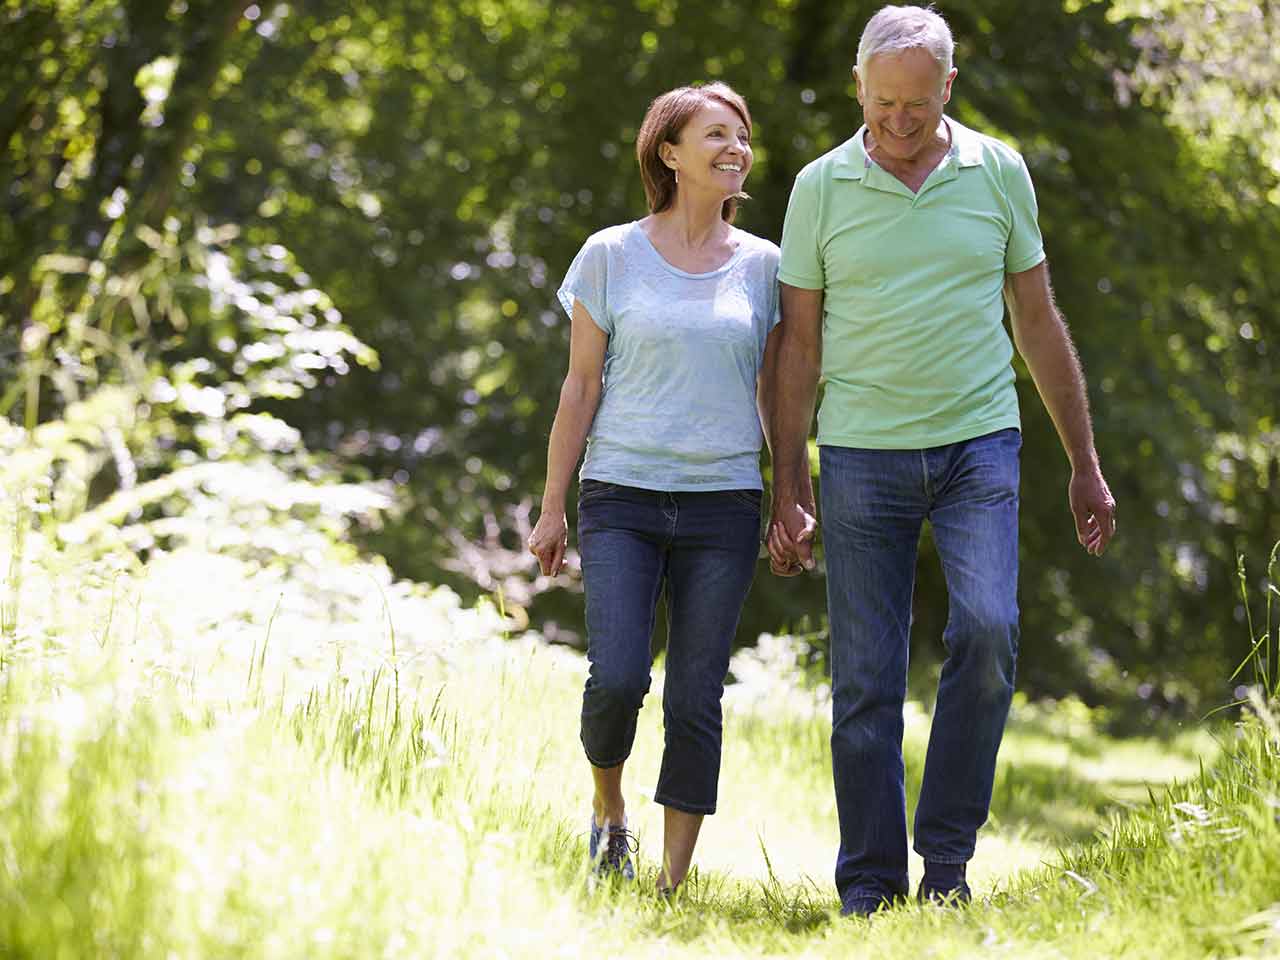 Mature couple laughing and walking in the sun